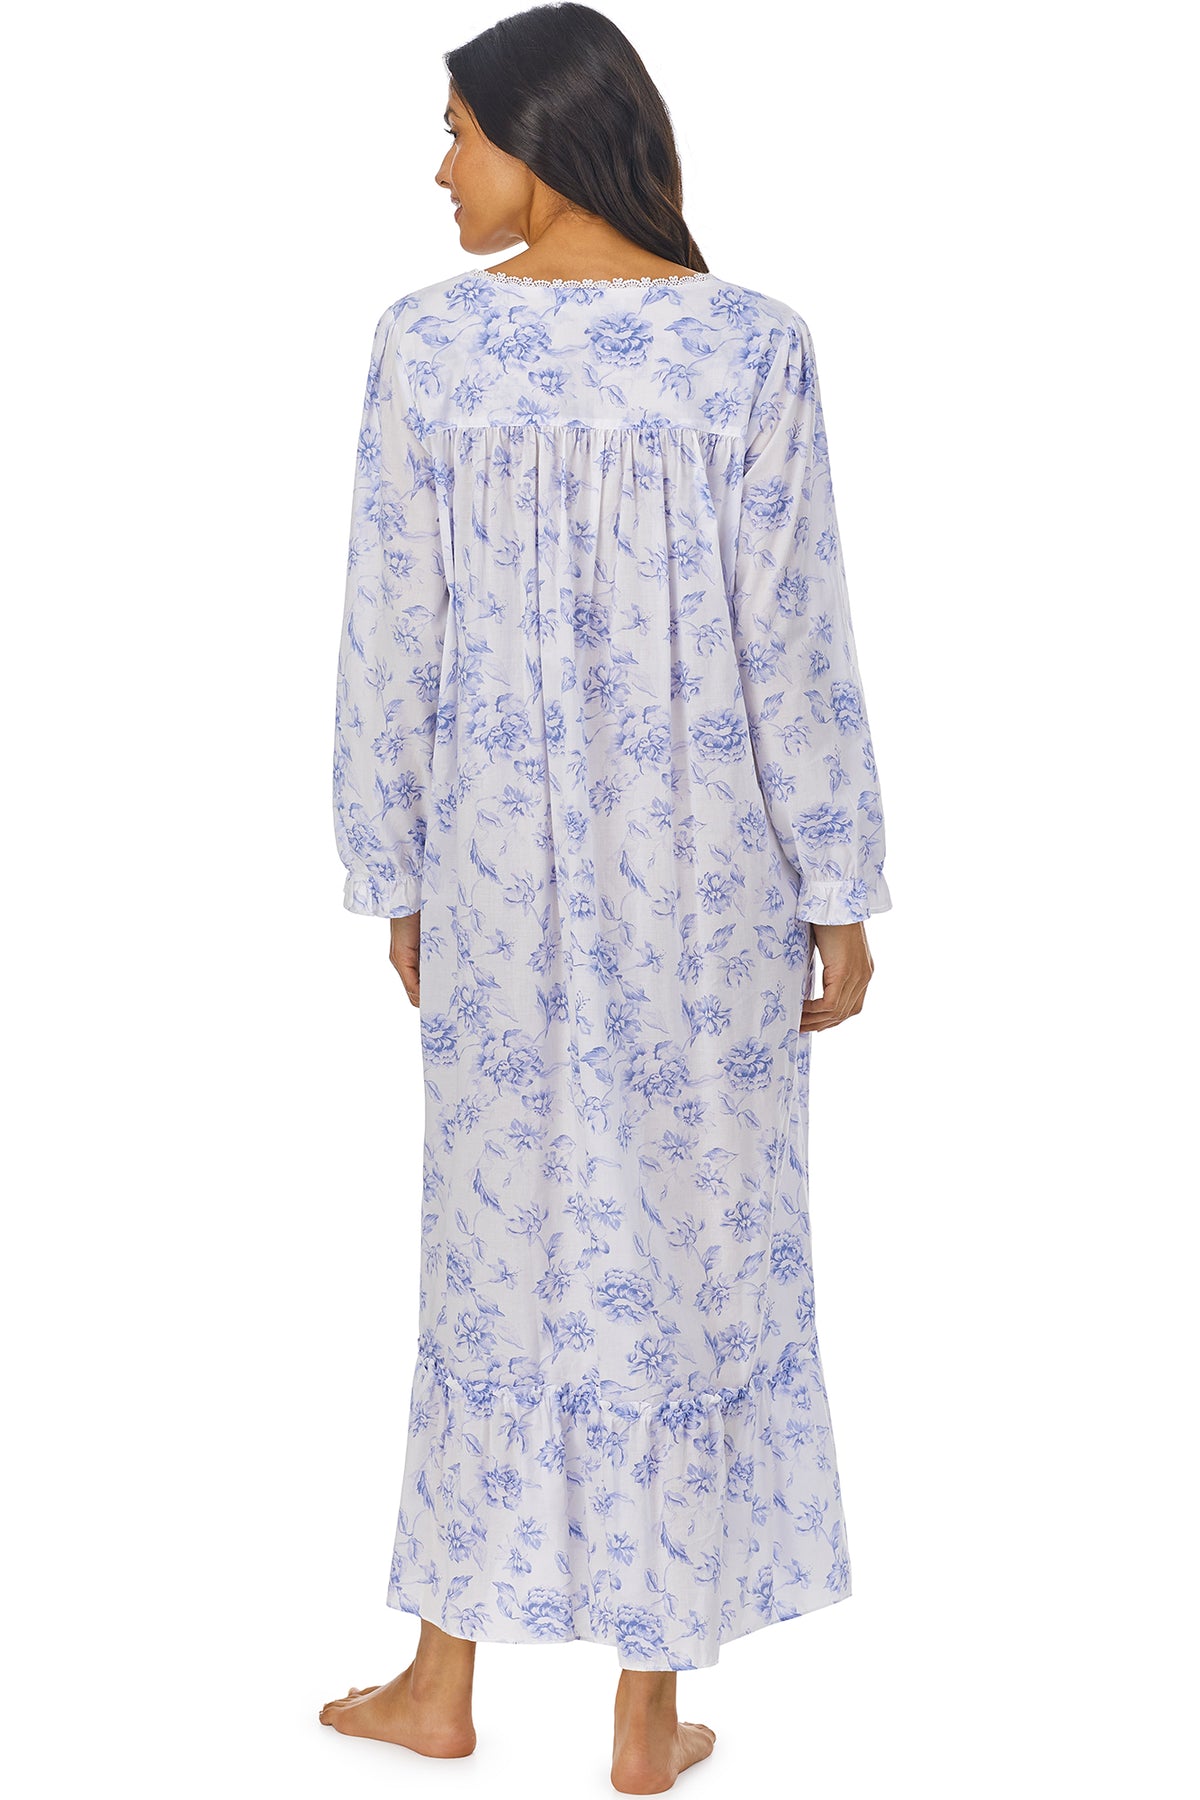 A lady wearing a white long sleeve button front robe with blue floral pattern.